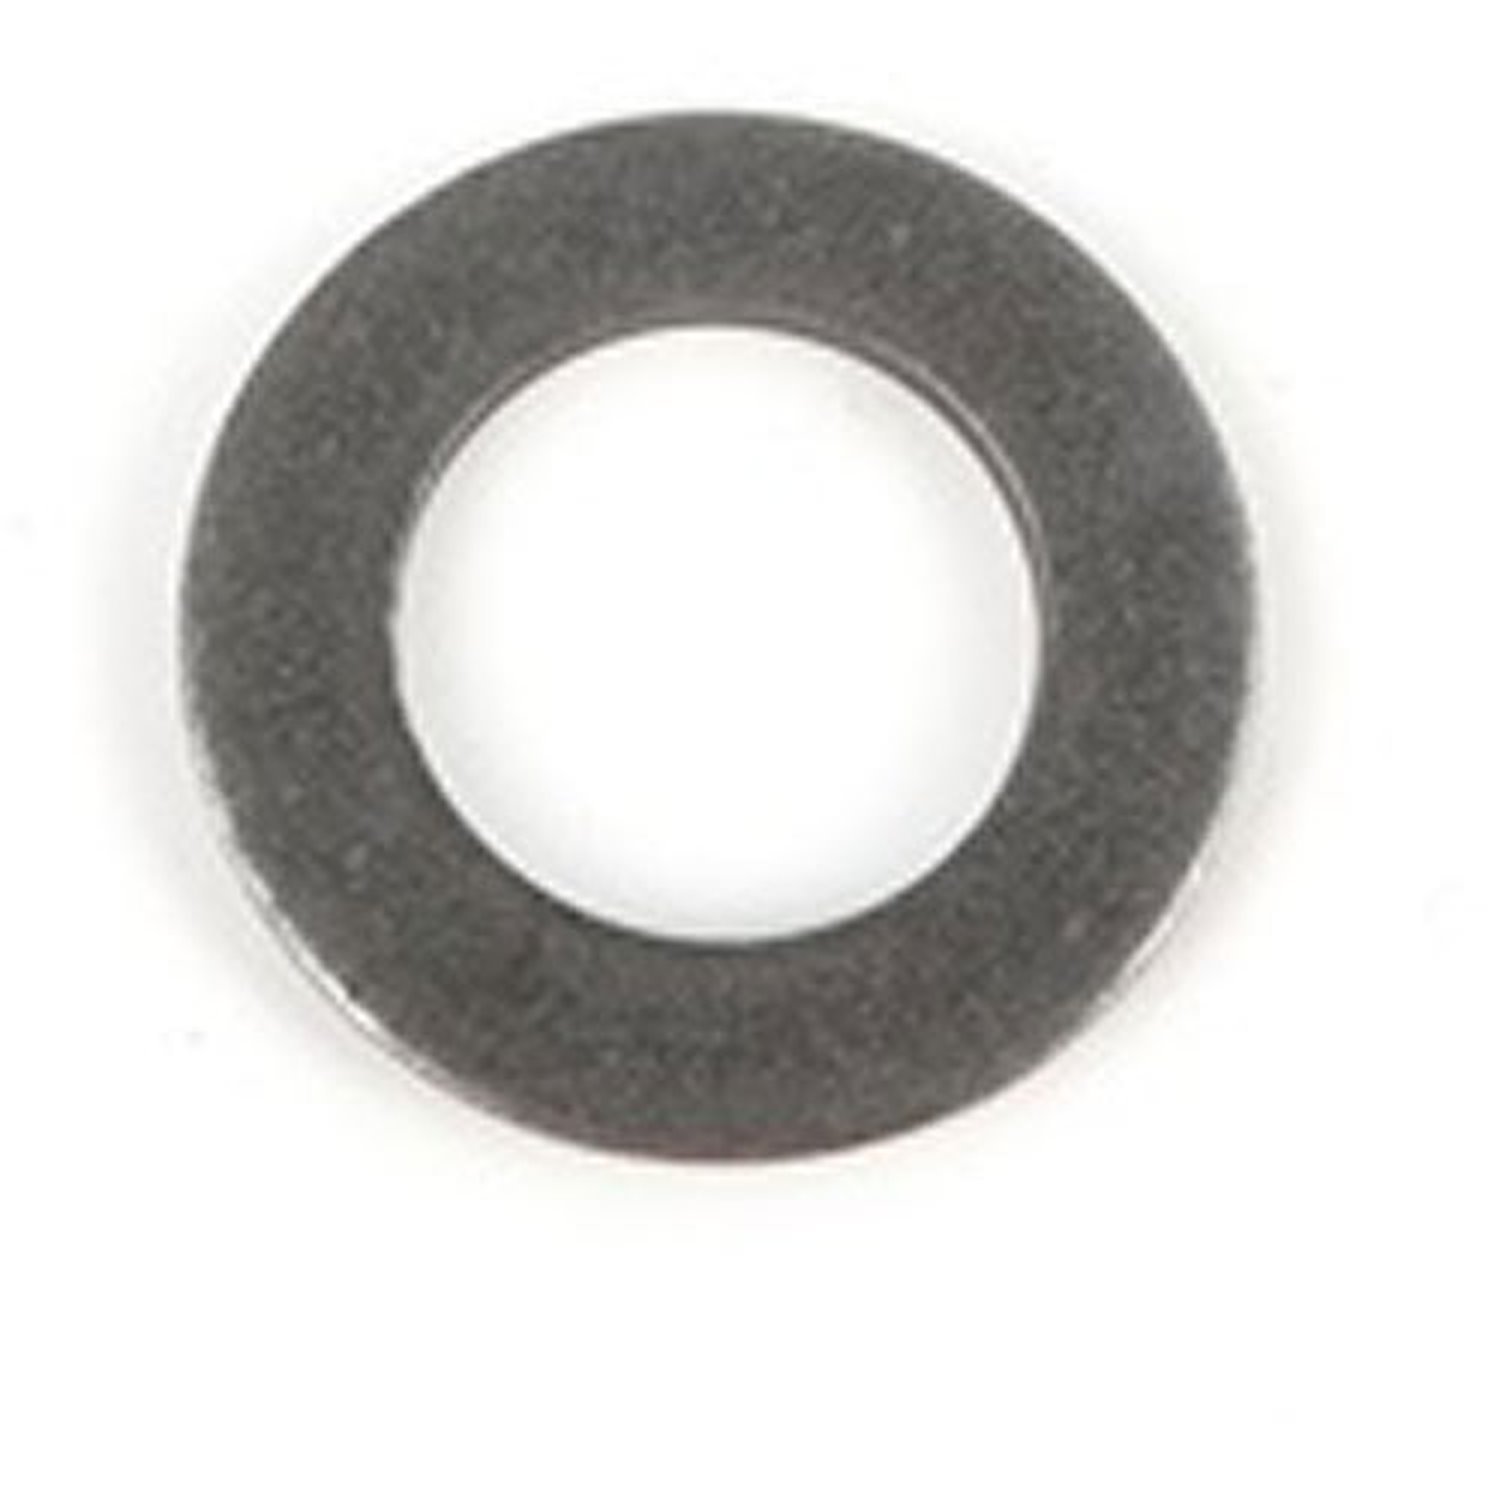 This pinion nut washer from Omix-ADA fits vehicles with Dana 60 or Dana 70 axles.